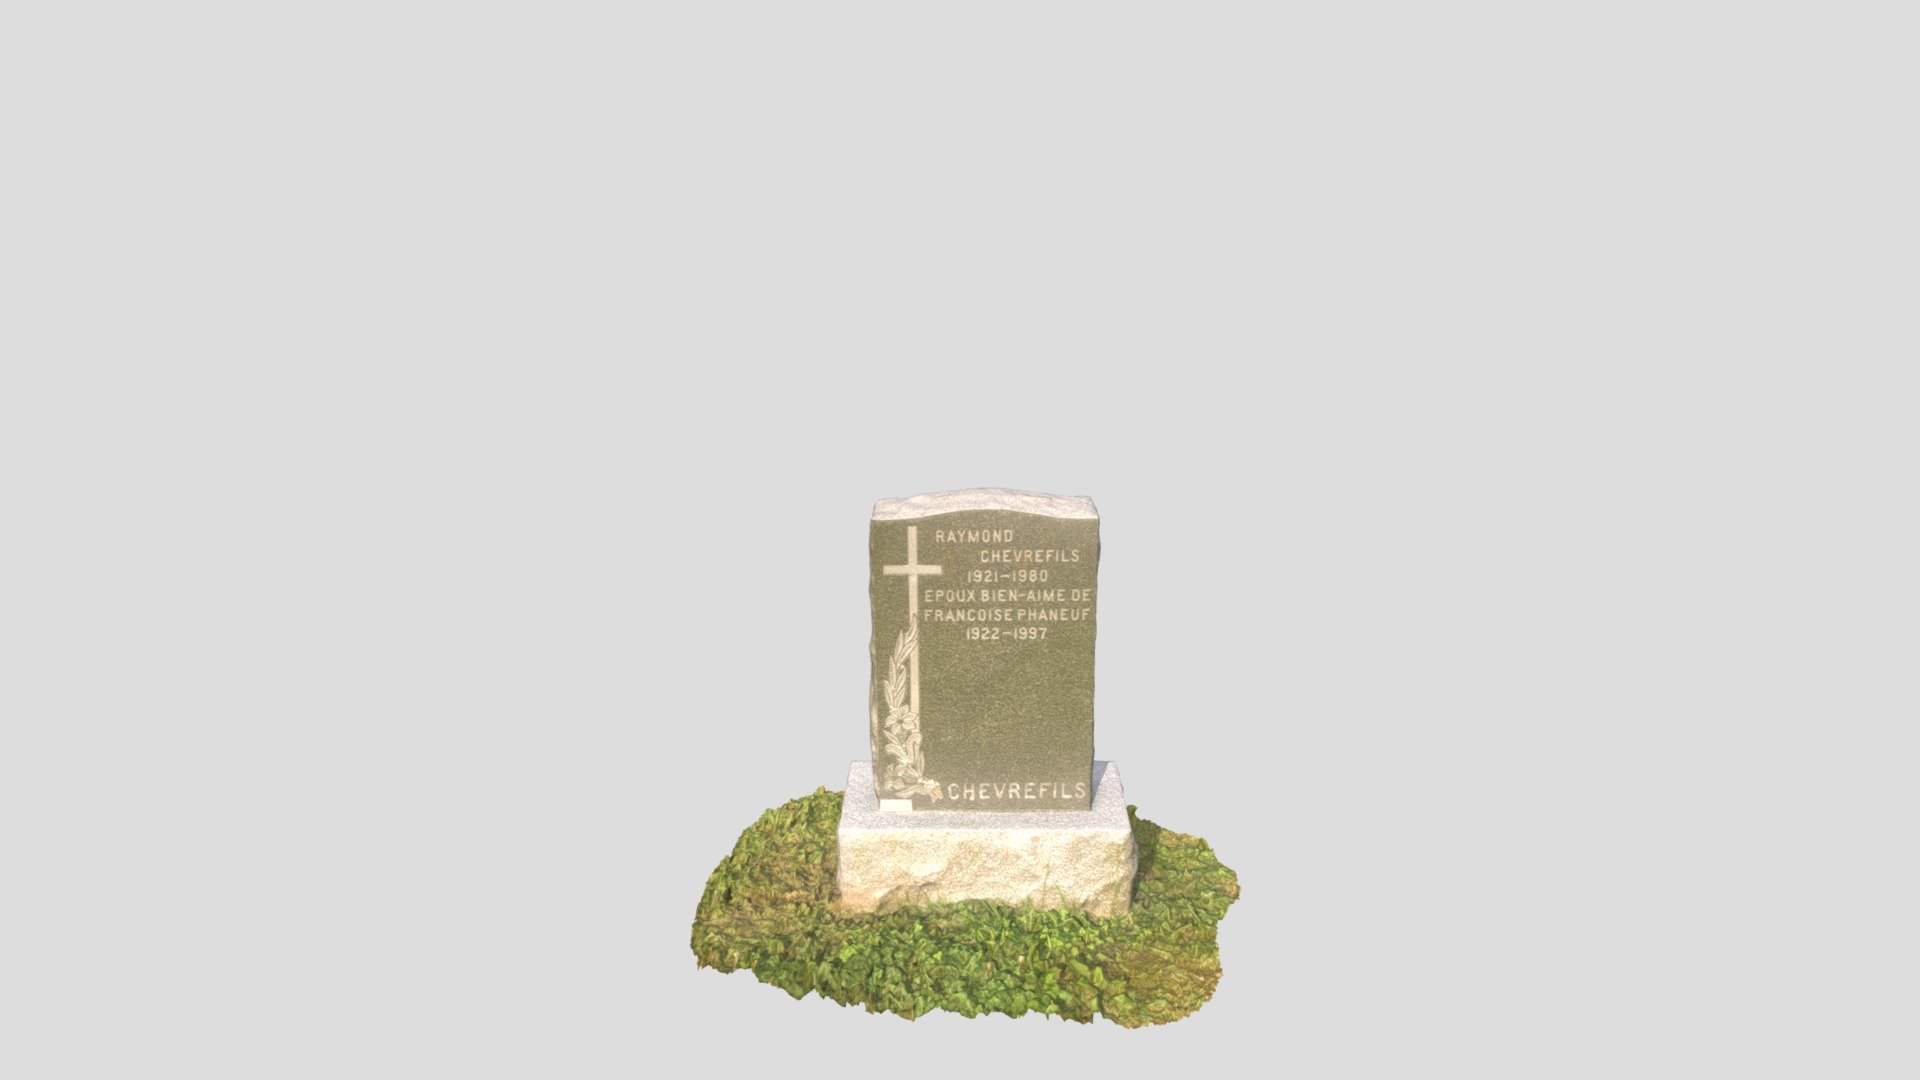 Tombstone scan
Taken in the town of Chateauguay, Quebec 3d model